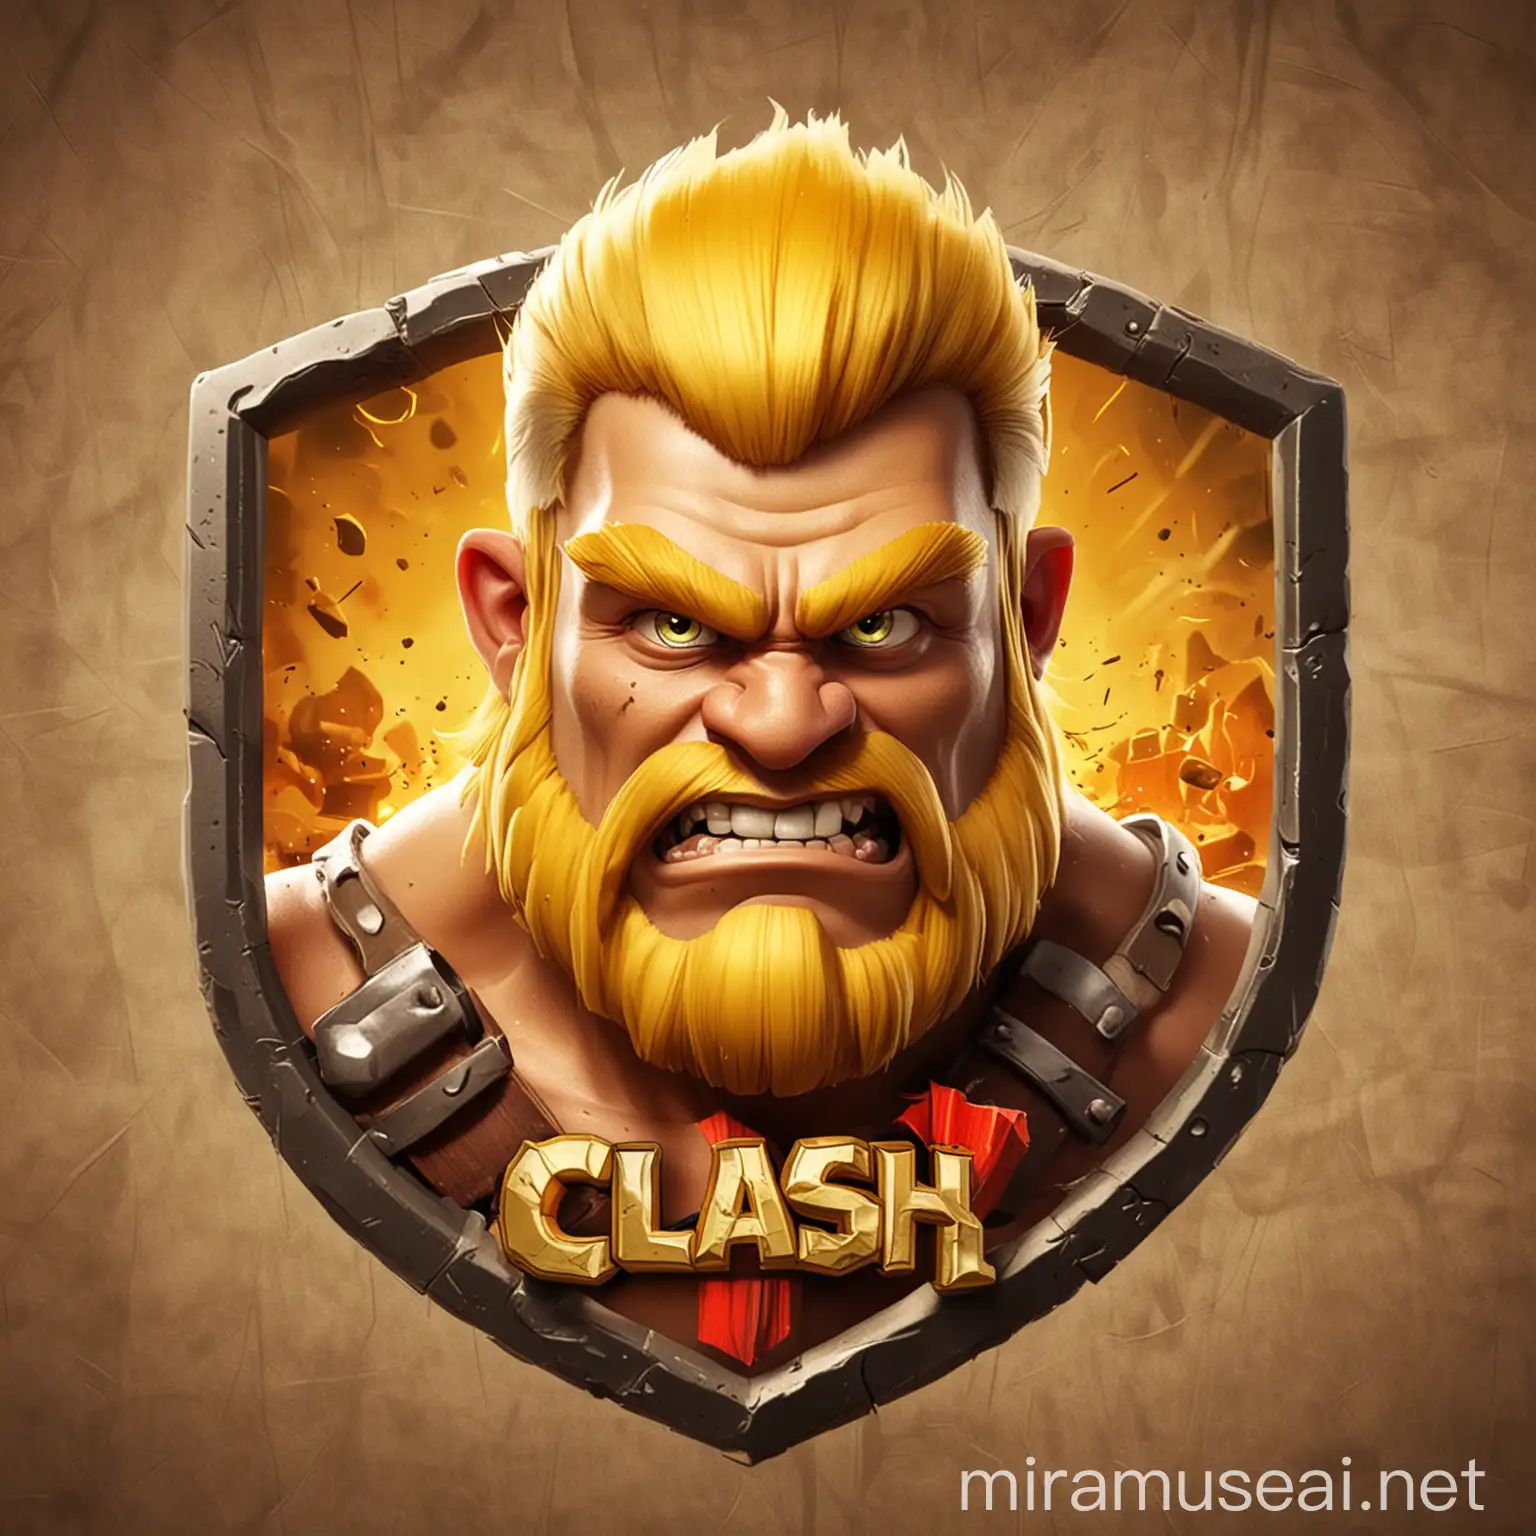 Imagine a logo for a Clash of Clans clan. Resembles the game Clash of Clans. Resembles a barbarian from the game with bright golden yellow hair. Do not have a name in the logo